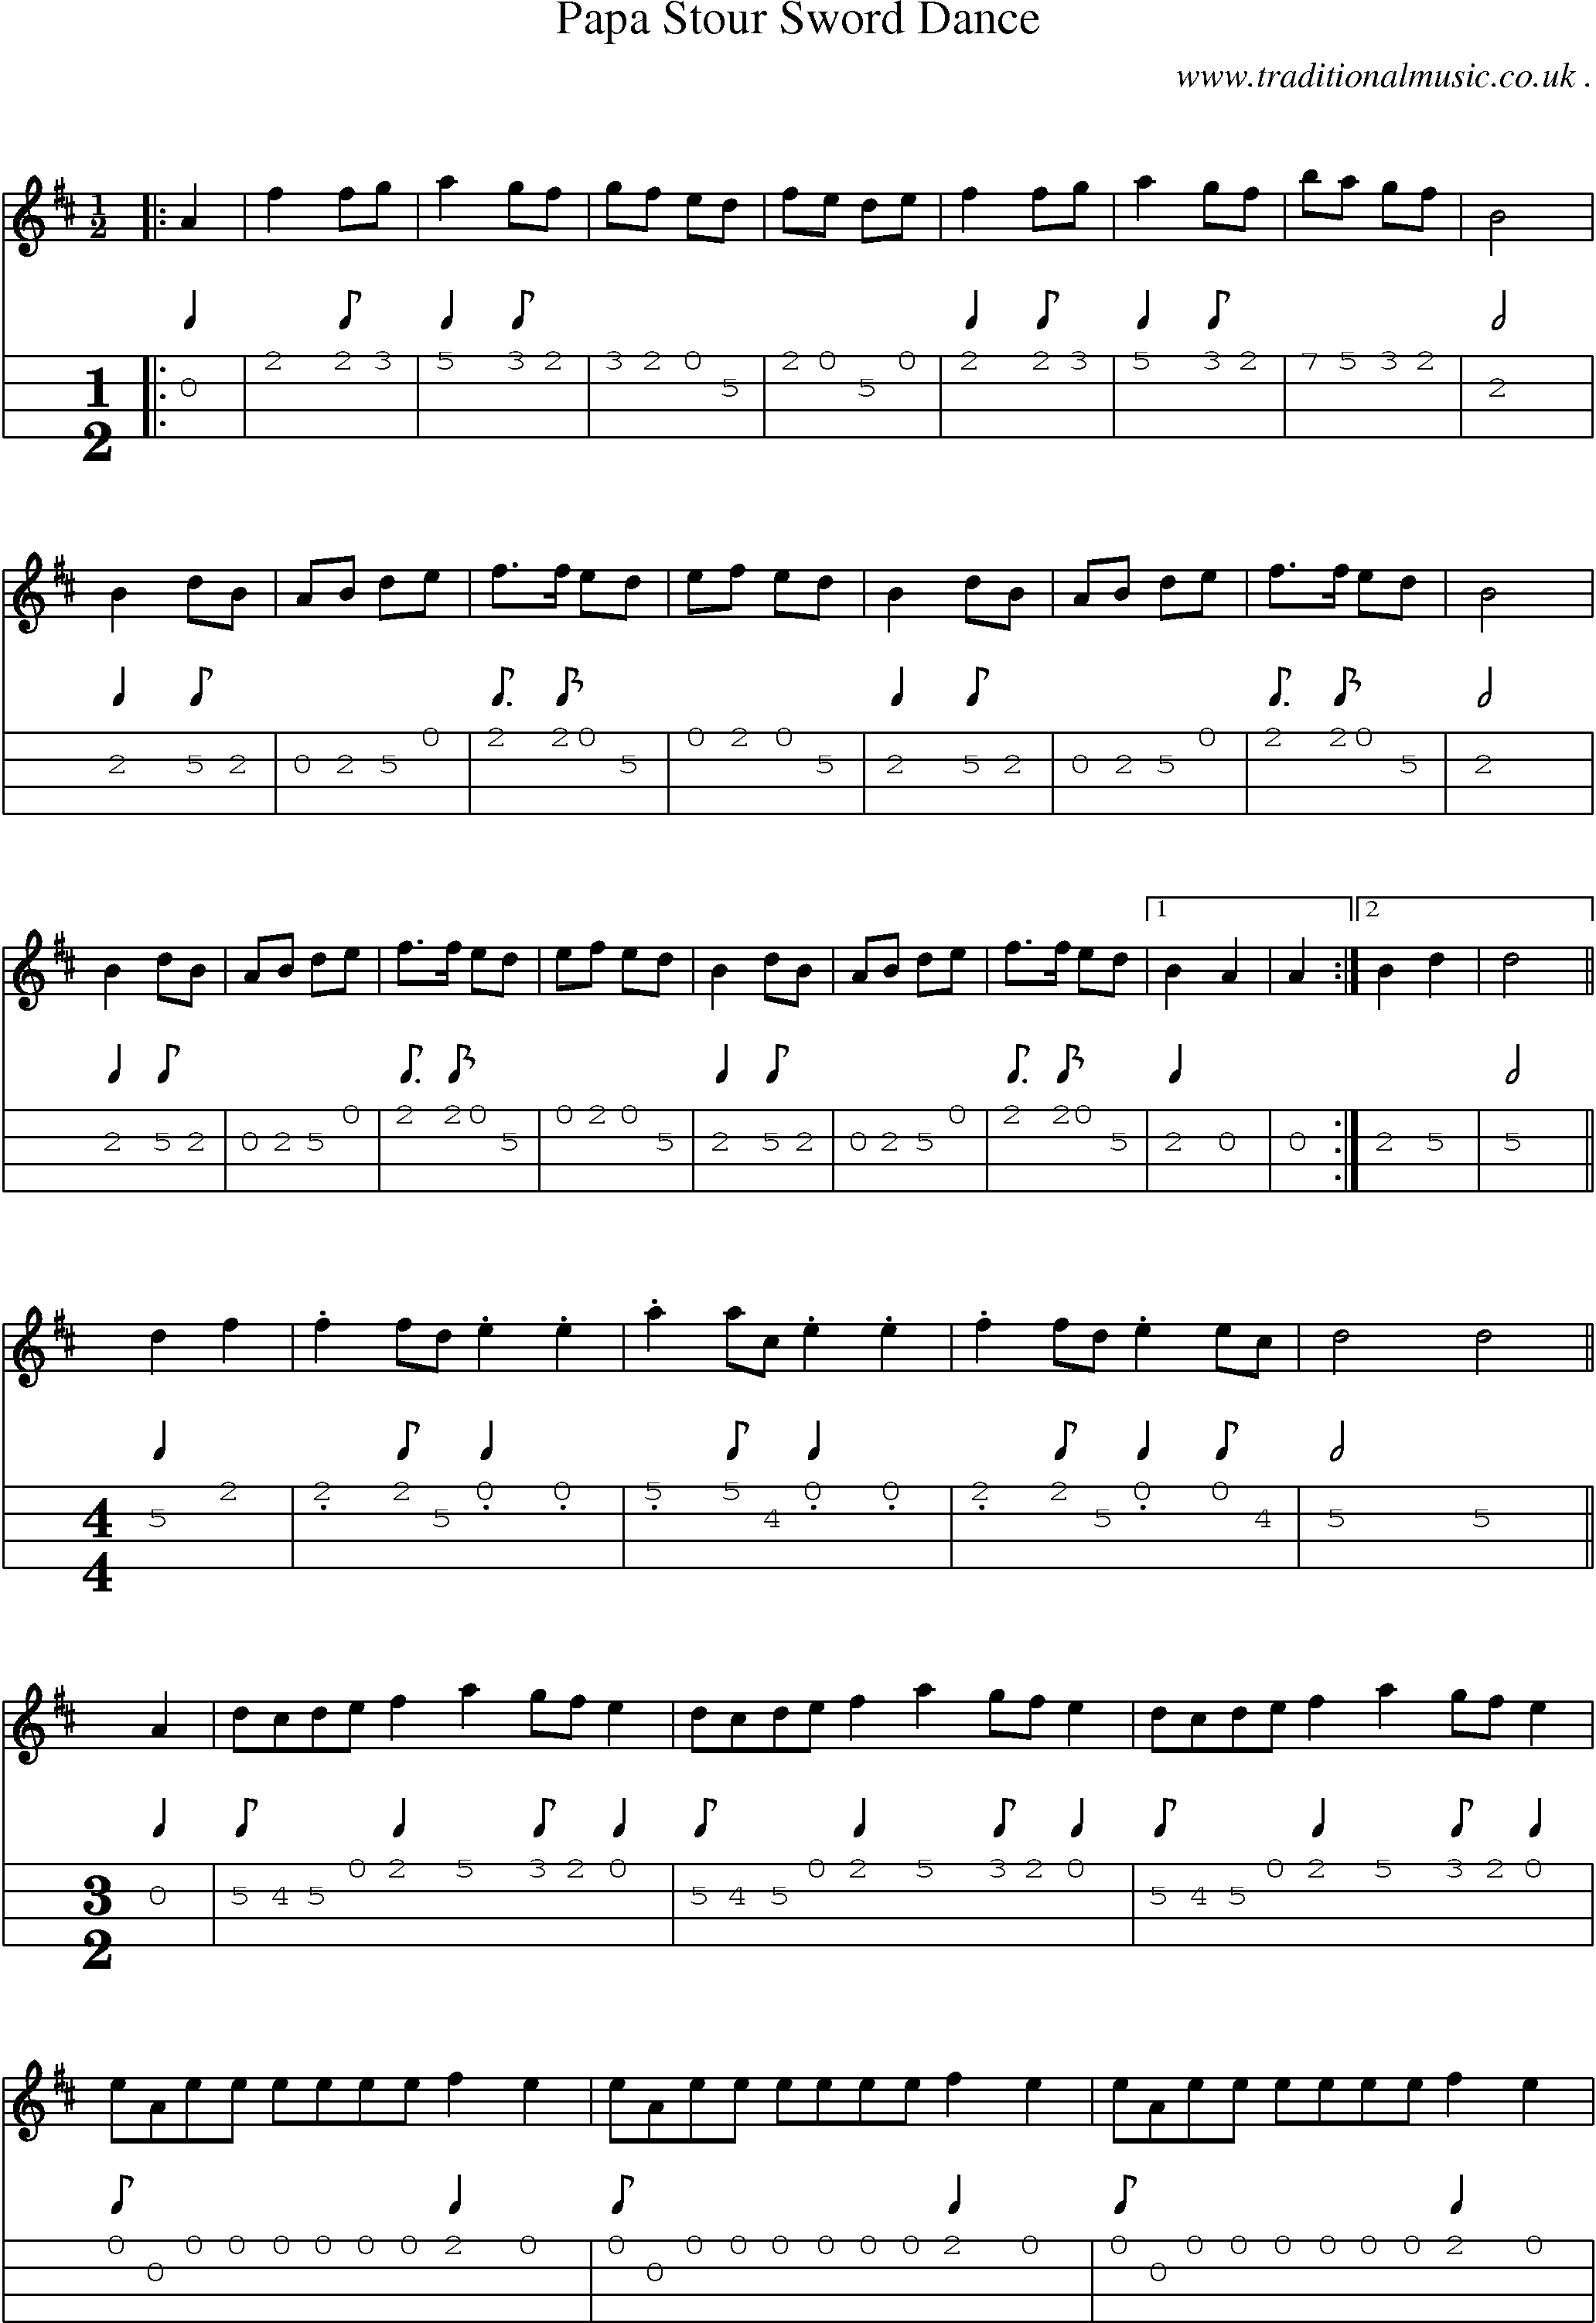 Sheet-Music and Mandolin Tabs for Papa Stour Sword Dance